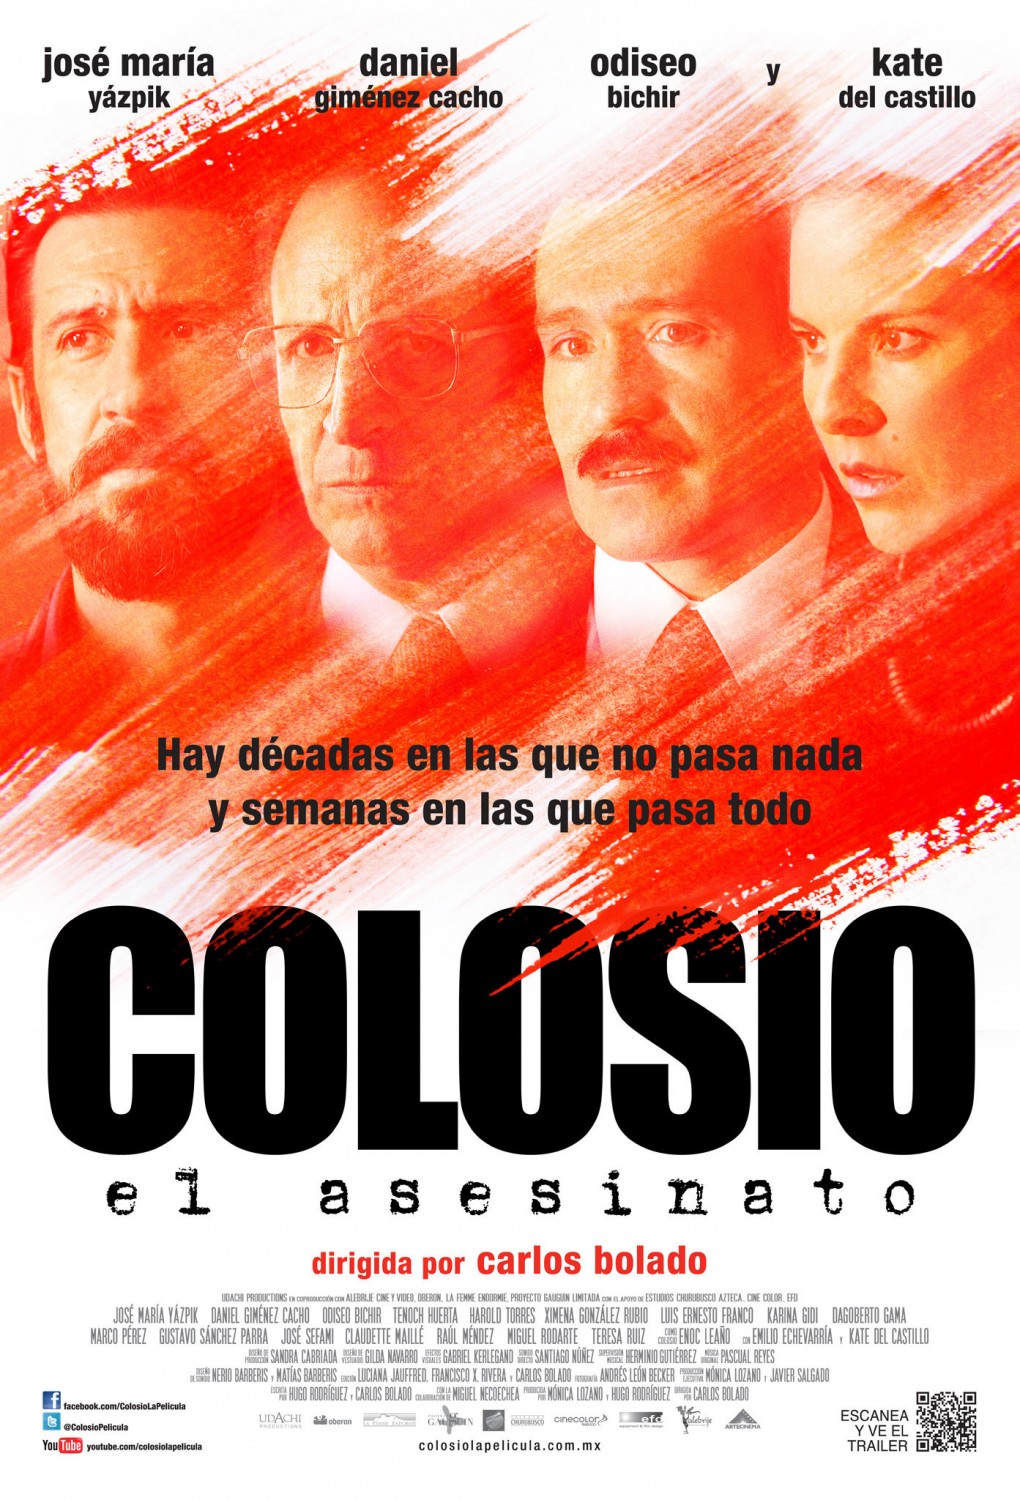 Extra Large Movie Poster Image for Colosio: El Asesinato 